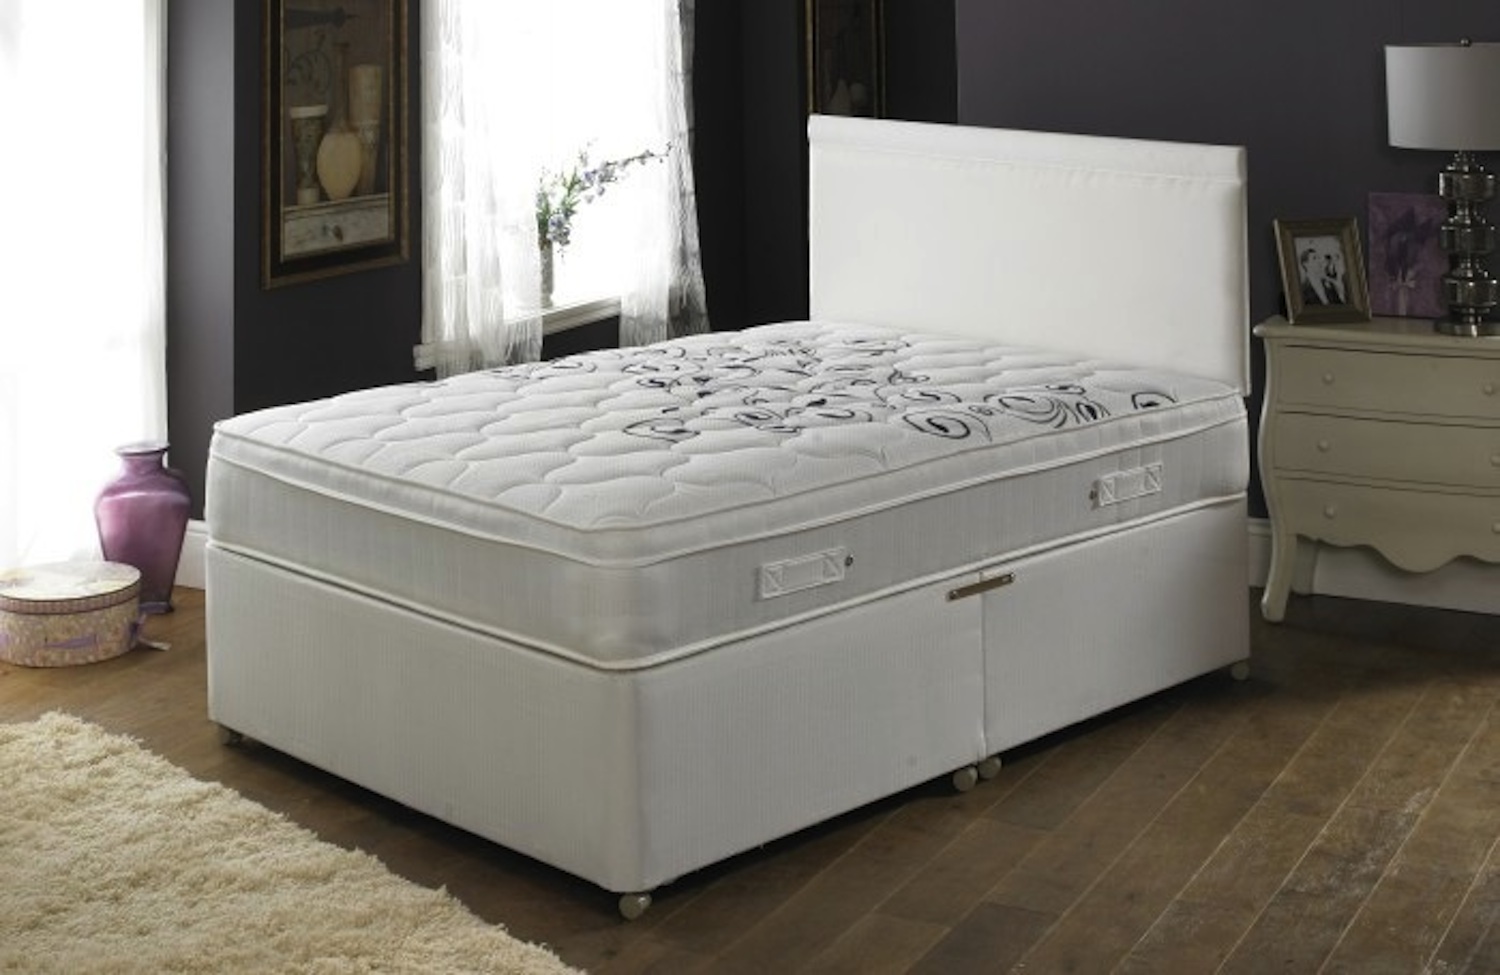 Joseph Crown Diadem Divan Bed-Super King Size-2 Drawers Either Side